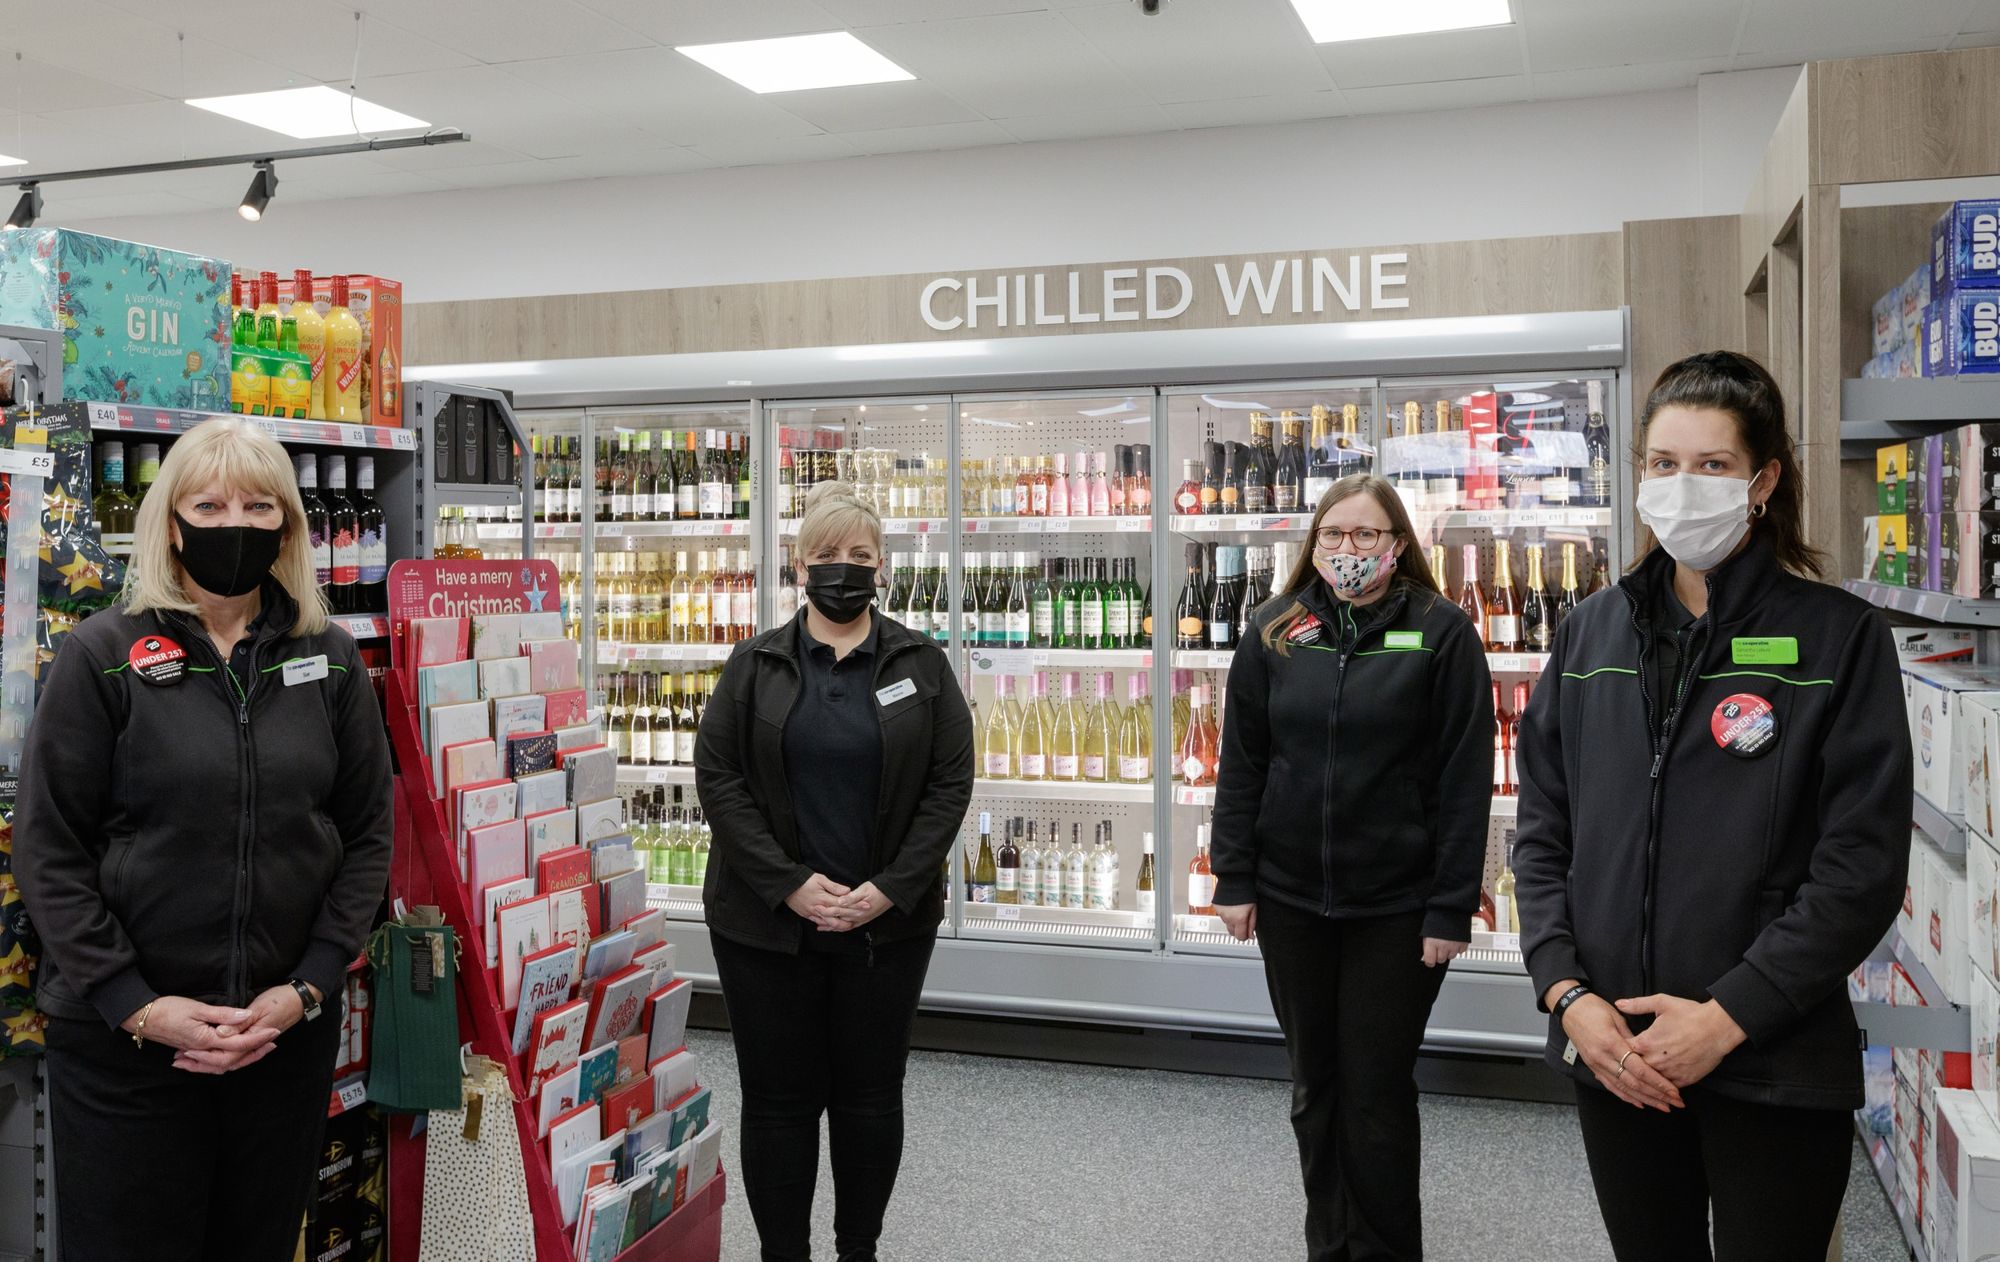 Investment of £116,000 brings a fresh new look to Cambridgeshire food store